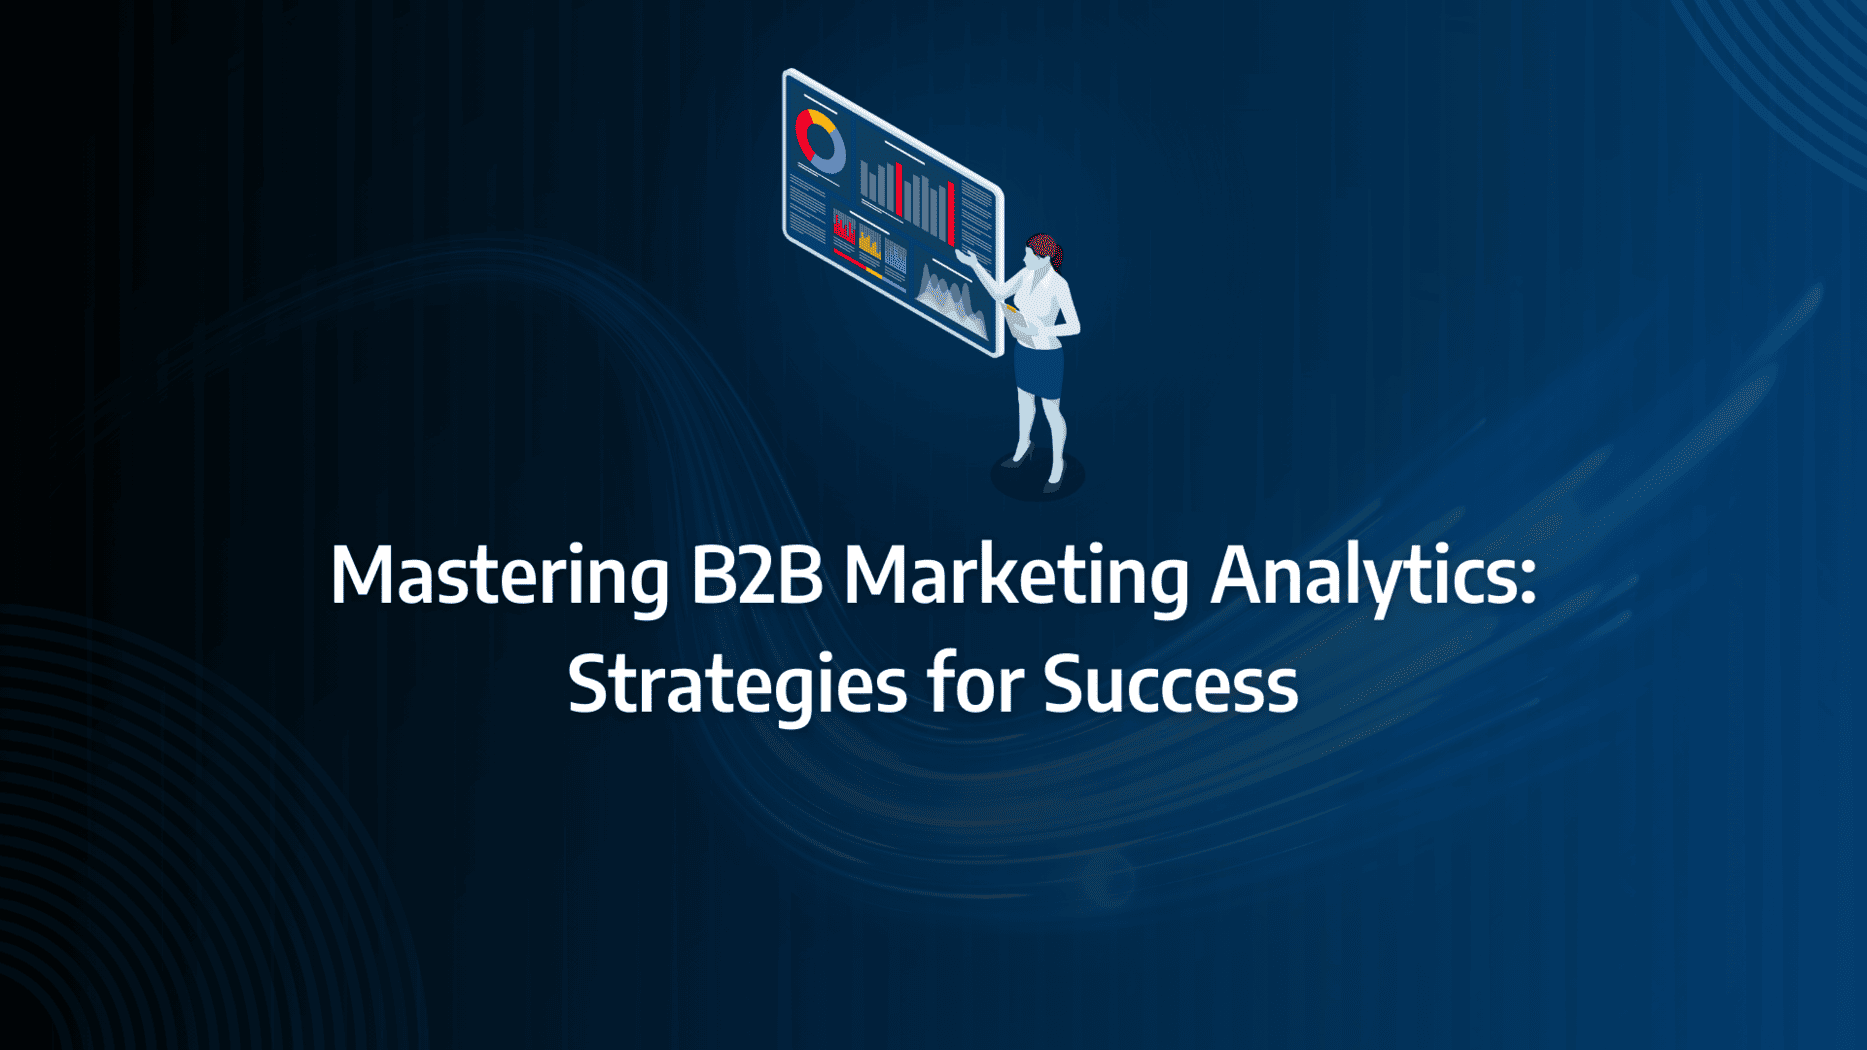 Complete Guide to Implementing B2B Marketing Analytics for Improved Decision Making: strategy framework diagram for digital marketing analytics, campaign analytics, marketing analytics tools, marketing analytics dashboard